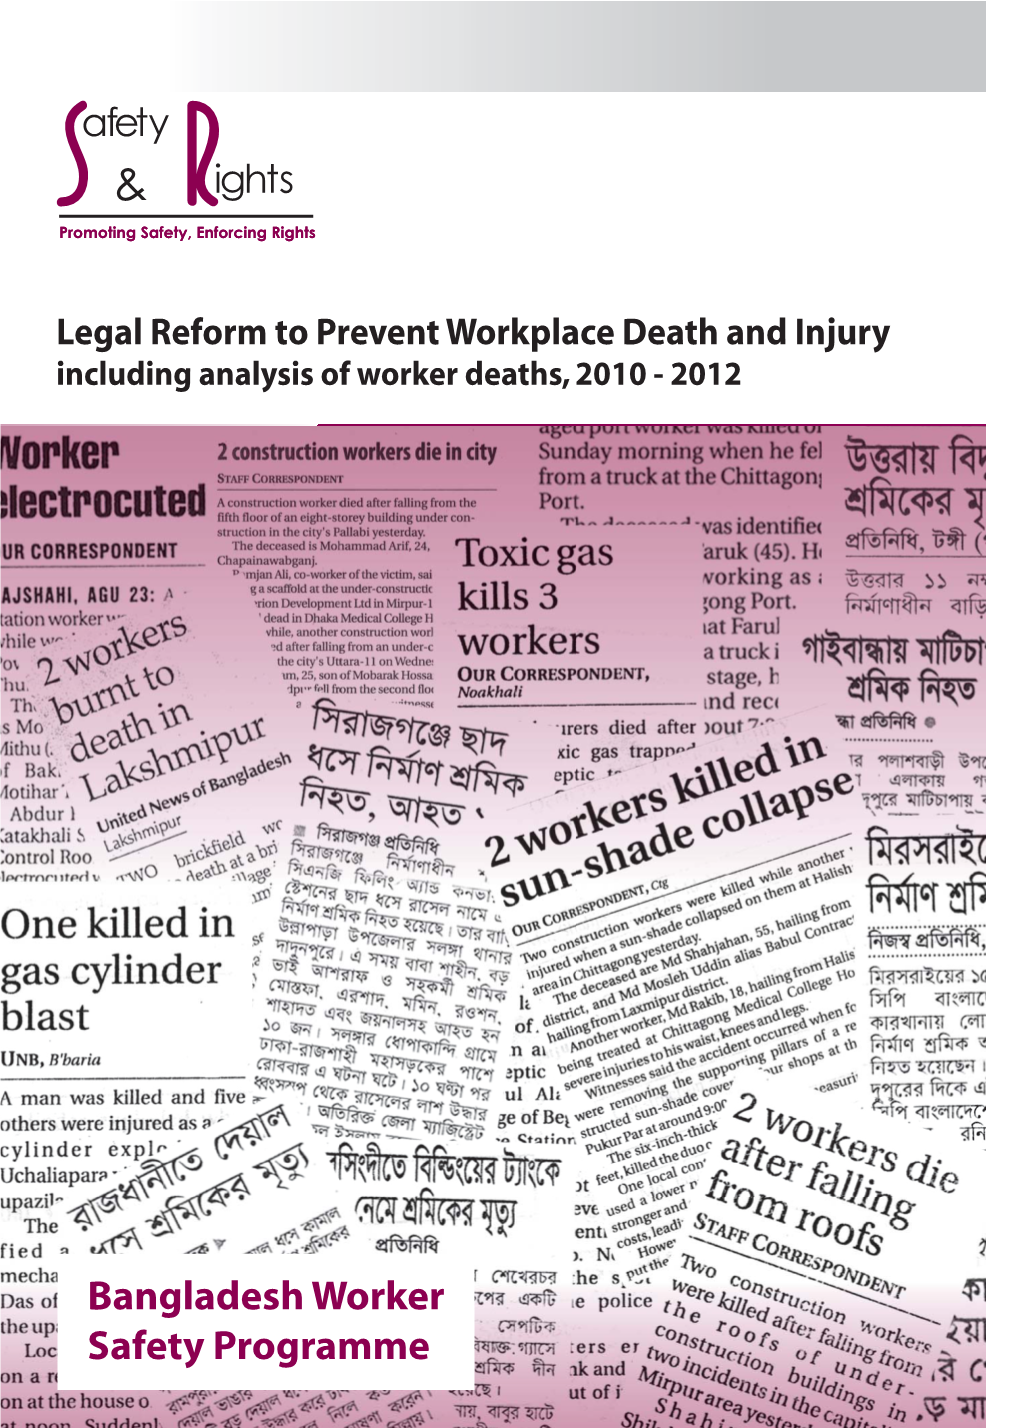 Legal Reform to Prevent Workplace Death and Injury